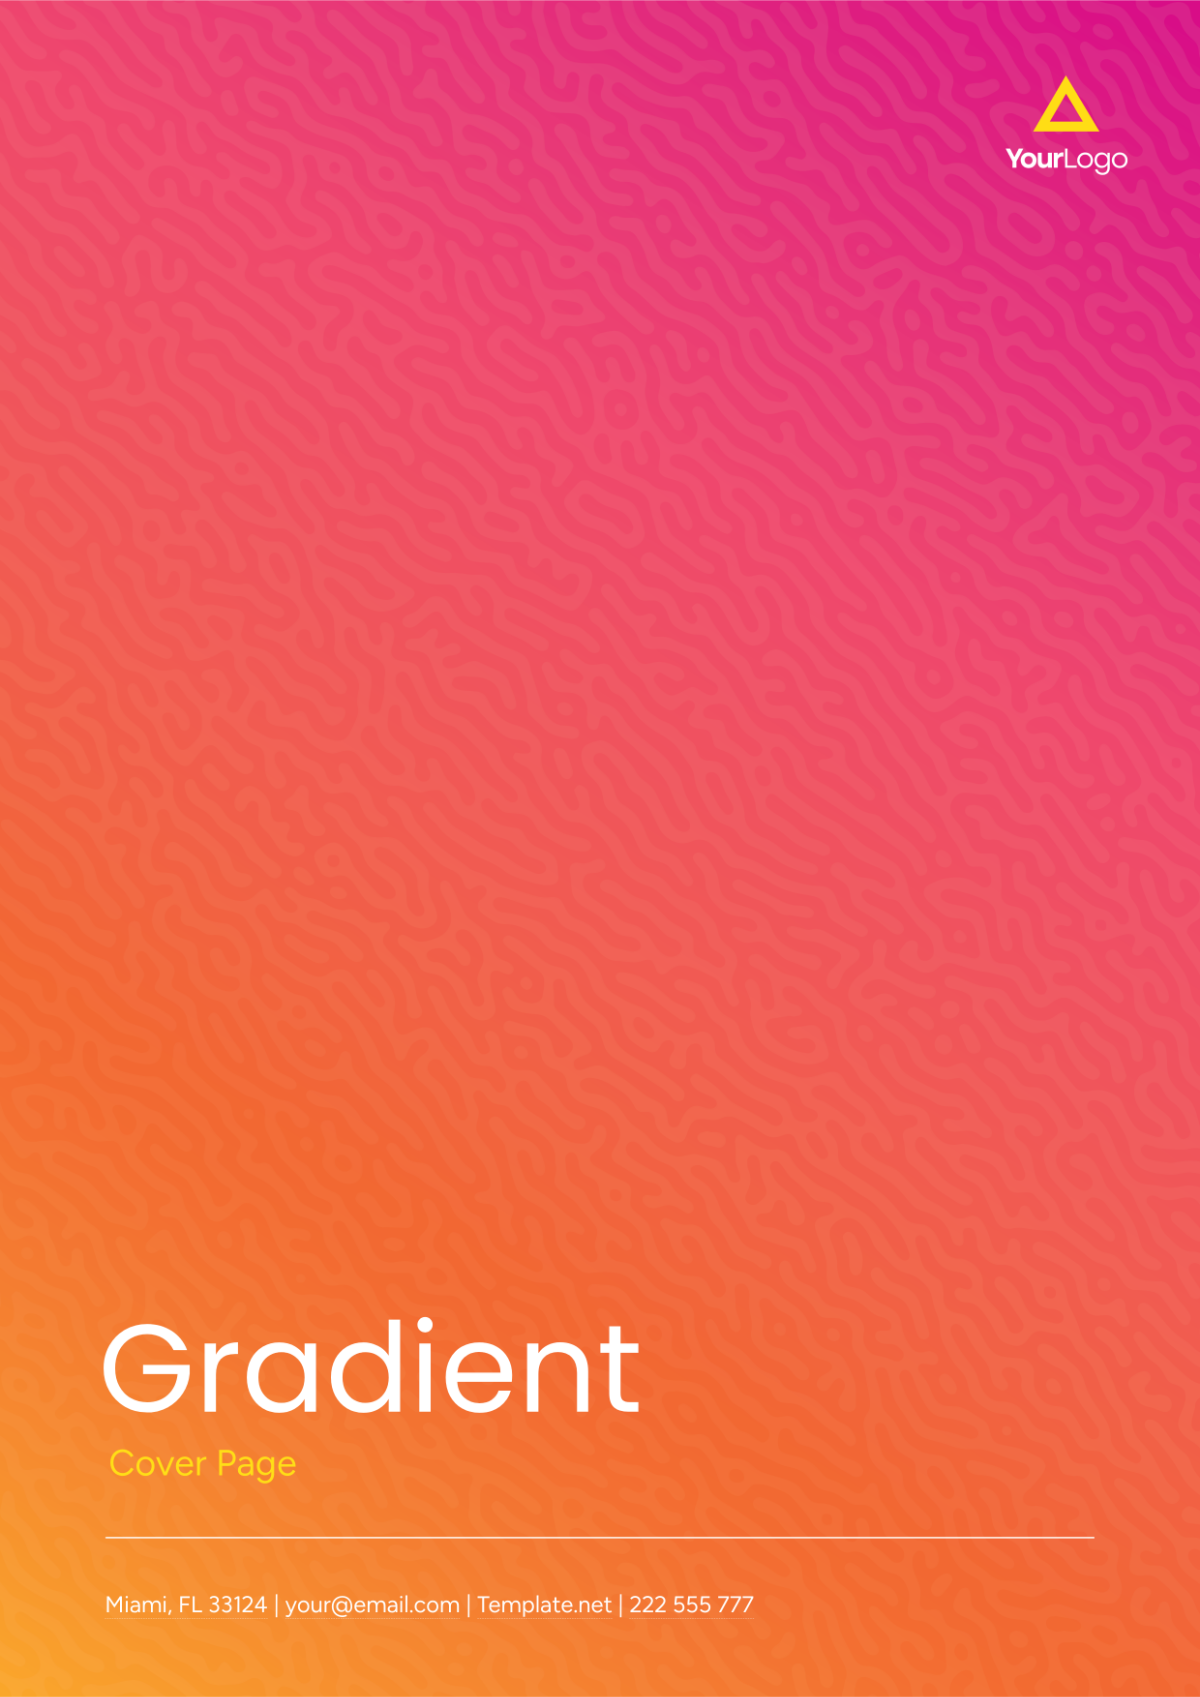 Gradient Heading Cover Page Template